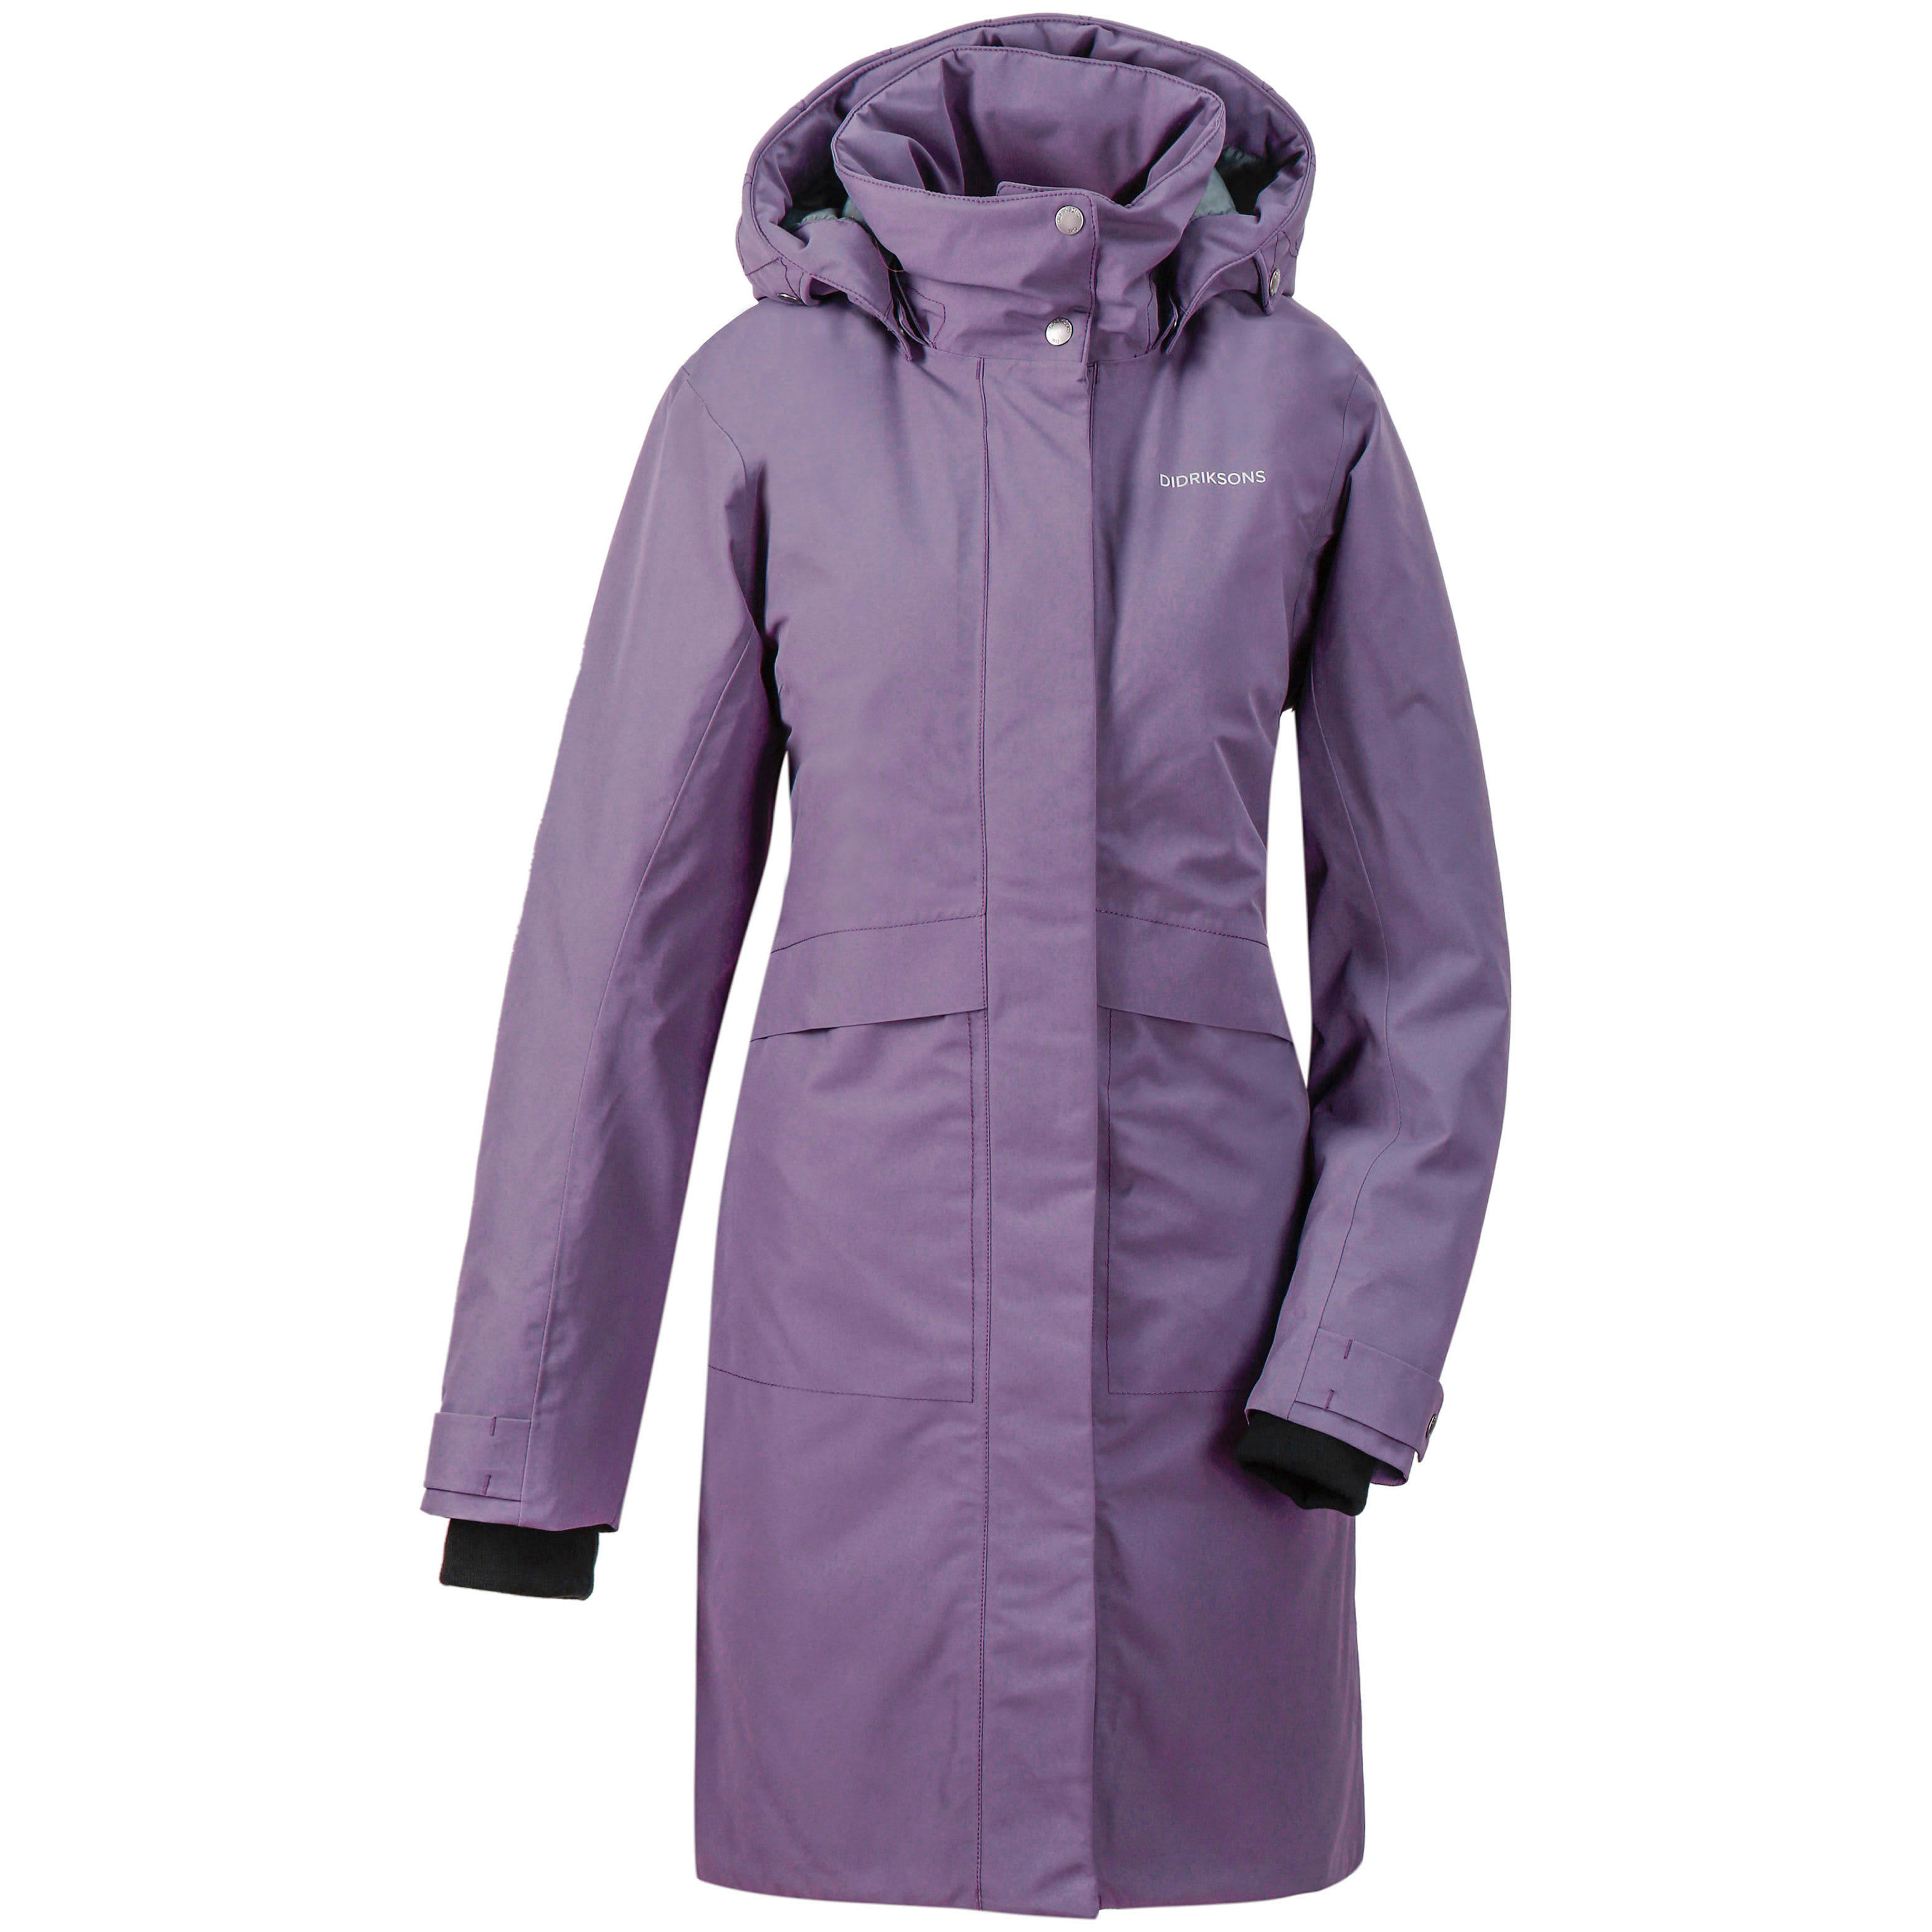 Buy Didriksons Emilia Women's Parka-C01 from Outnorth